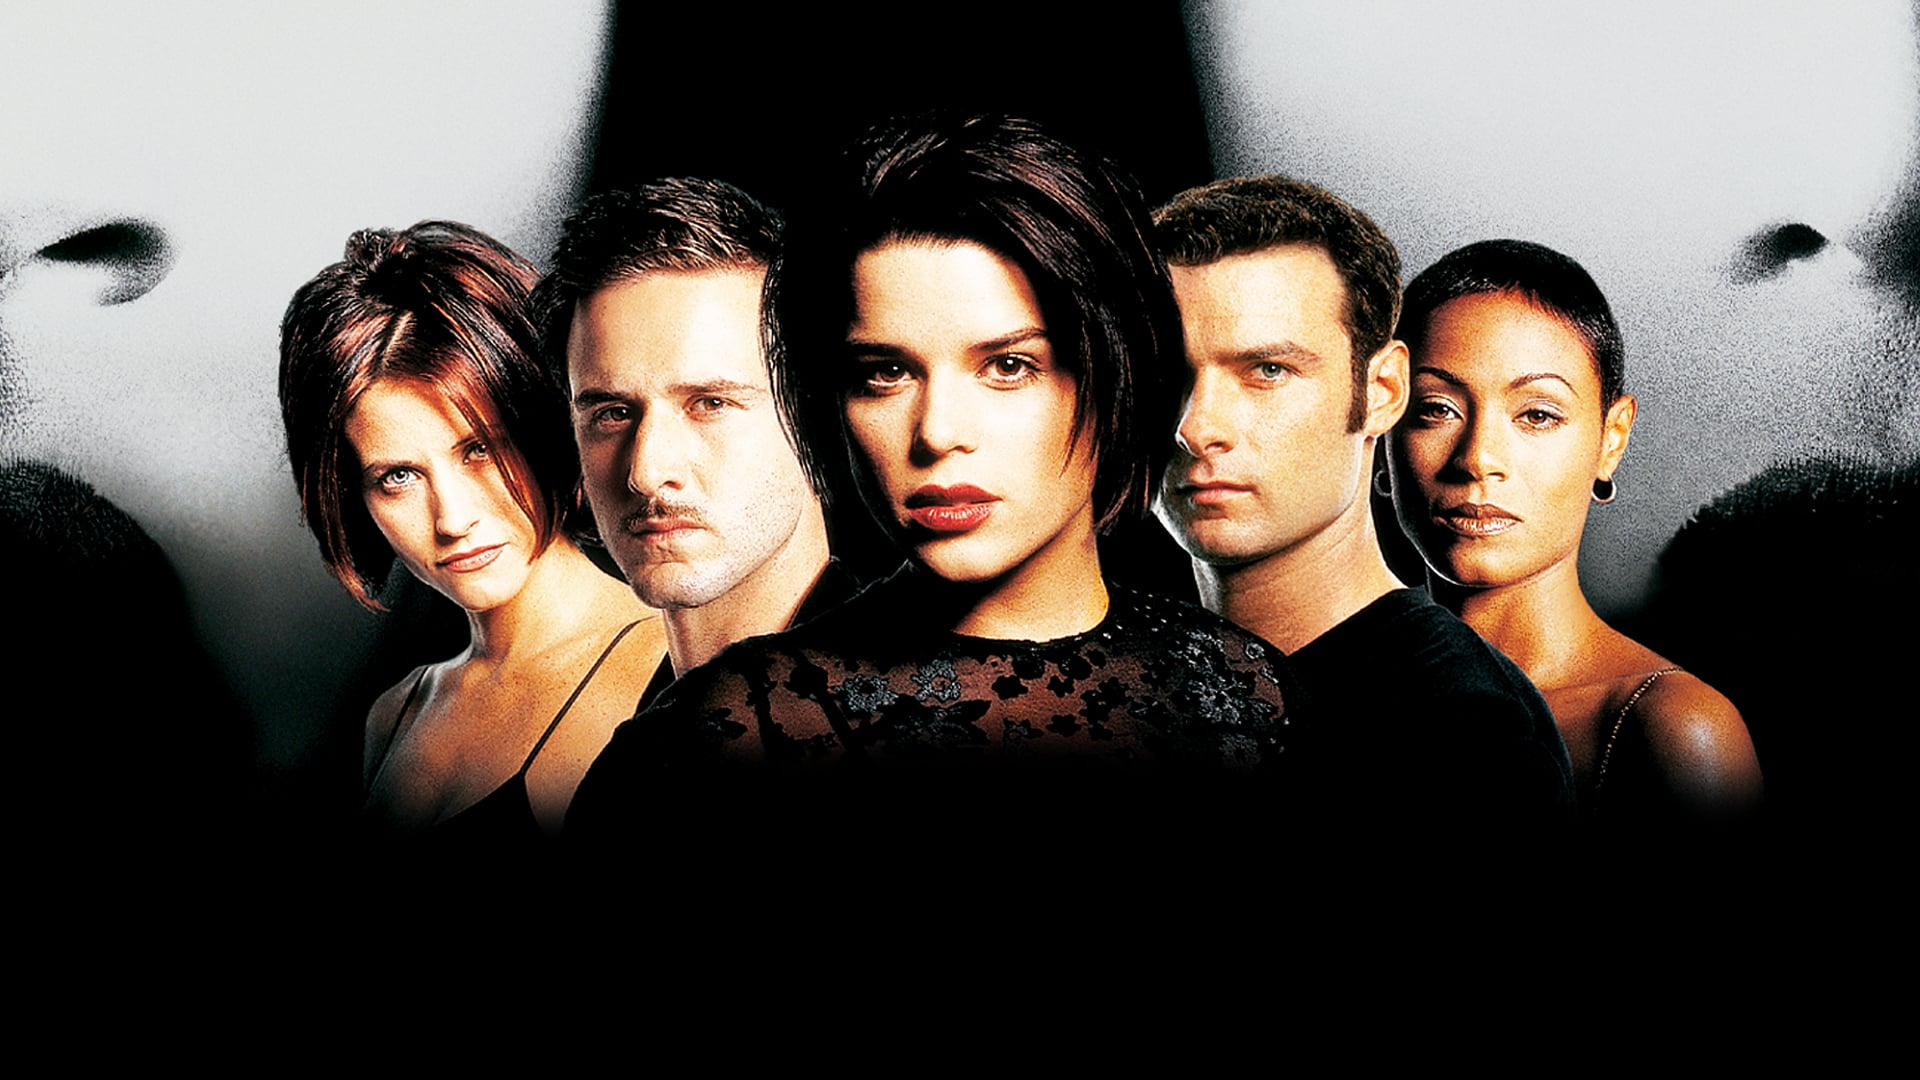 1920x1080 Scream 2 Soundtrack Music Complete Song List | Tunefind